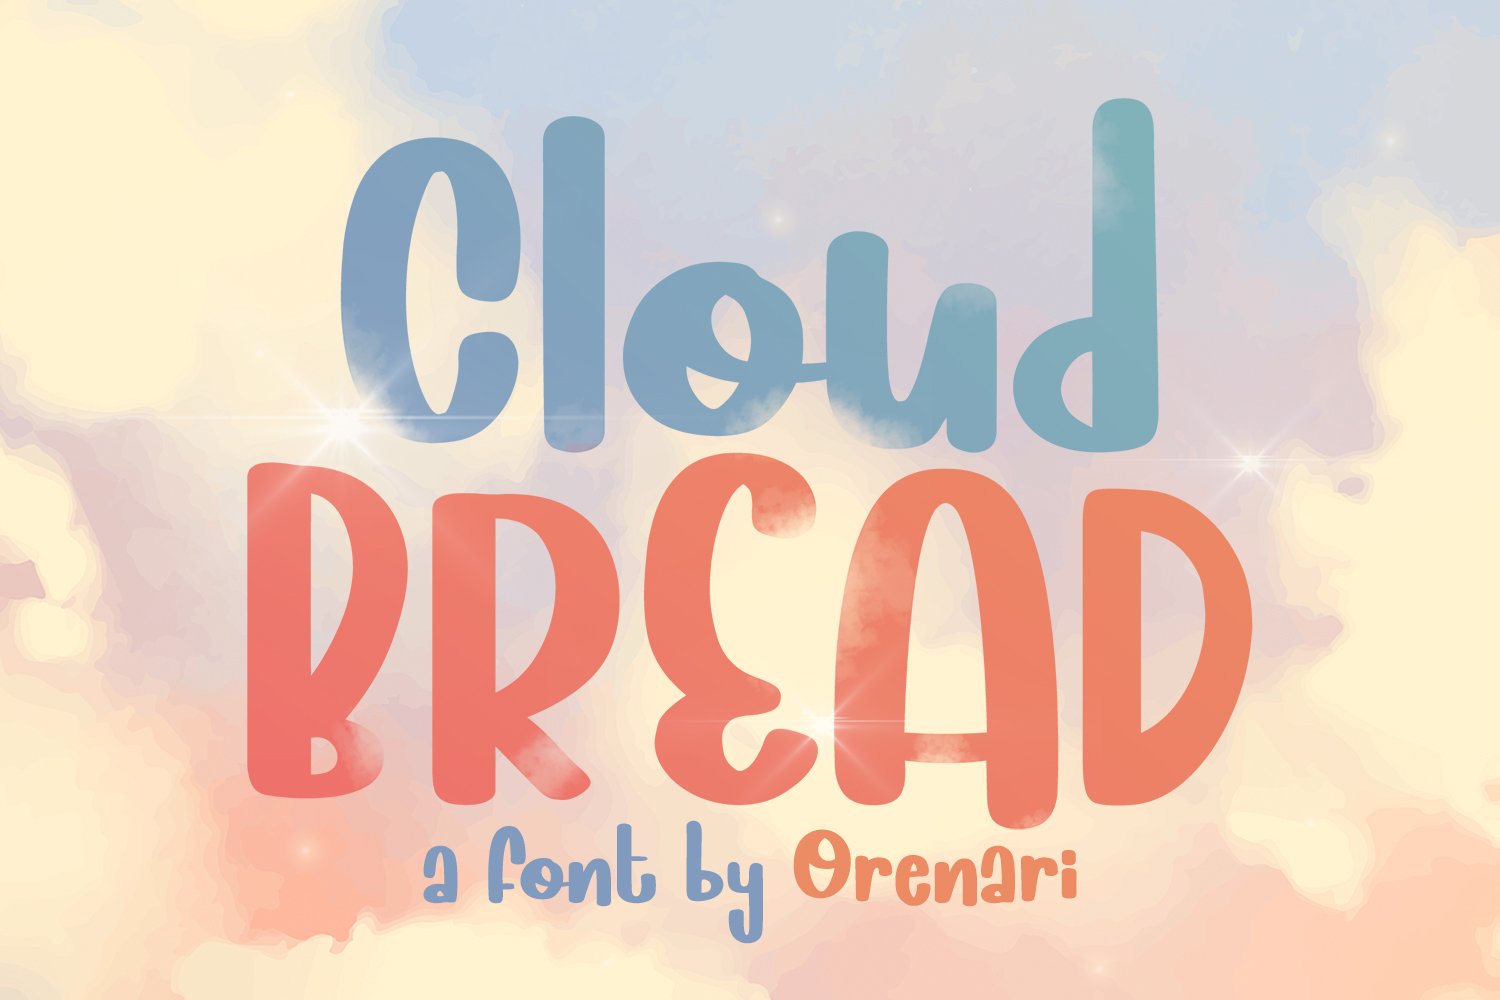 Cloud Bread cover image.